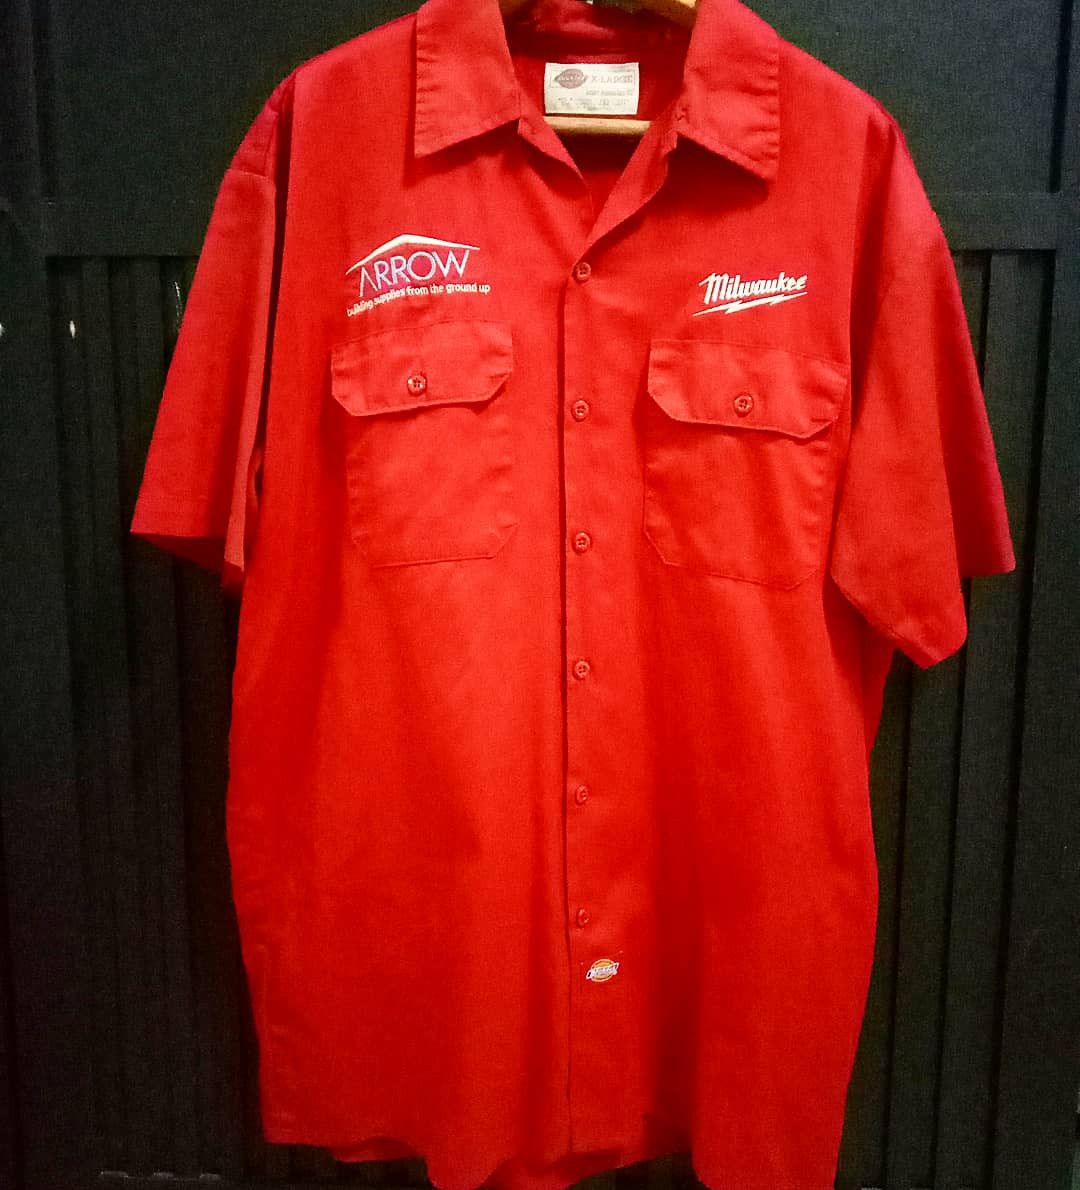 Vintage Vintage Dickies Workers Industrial shirts Engineer fashion Size US XL / EU 56 / 4 - 1 Preview